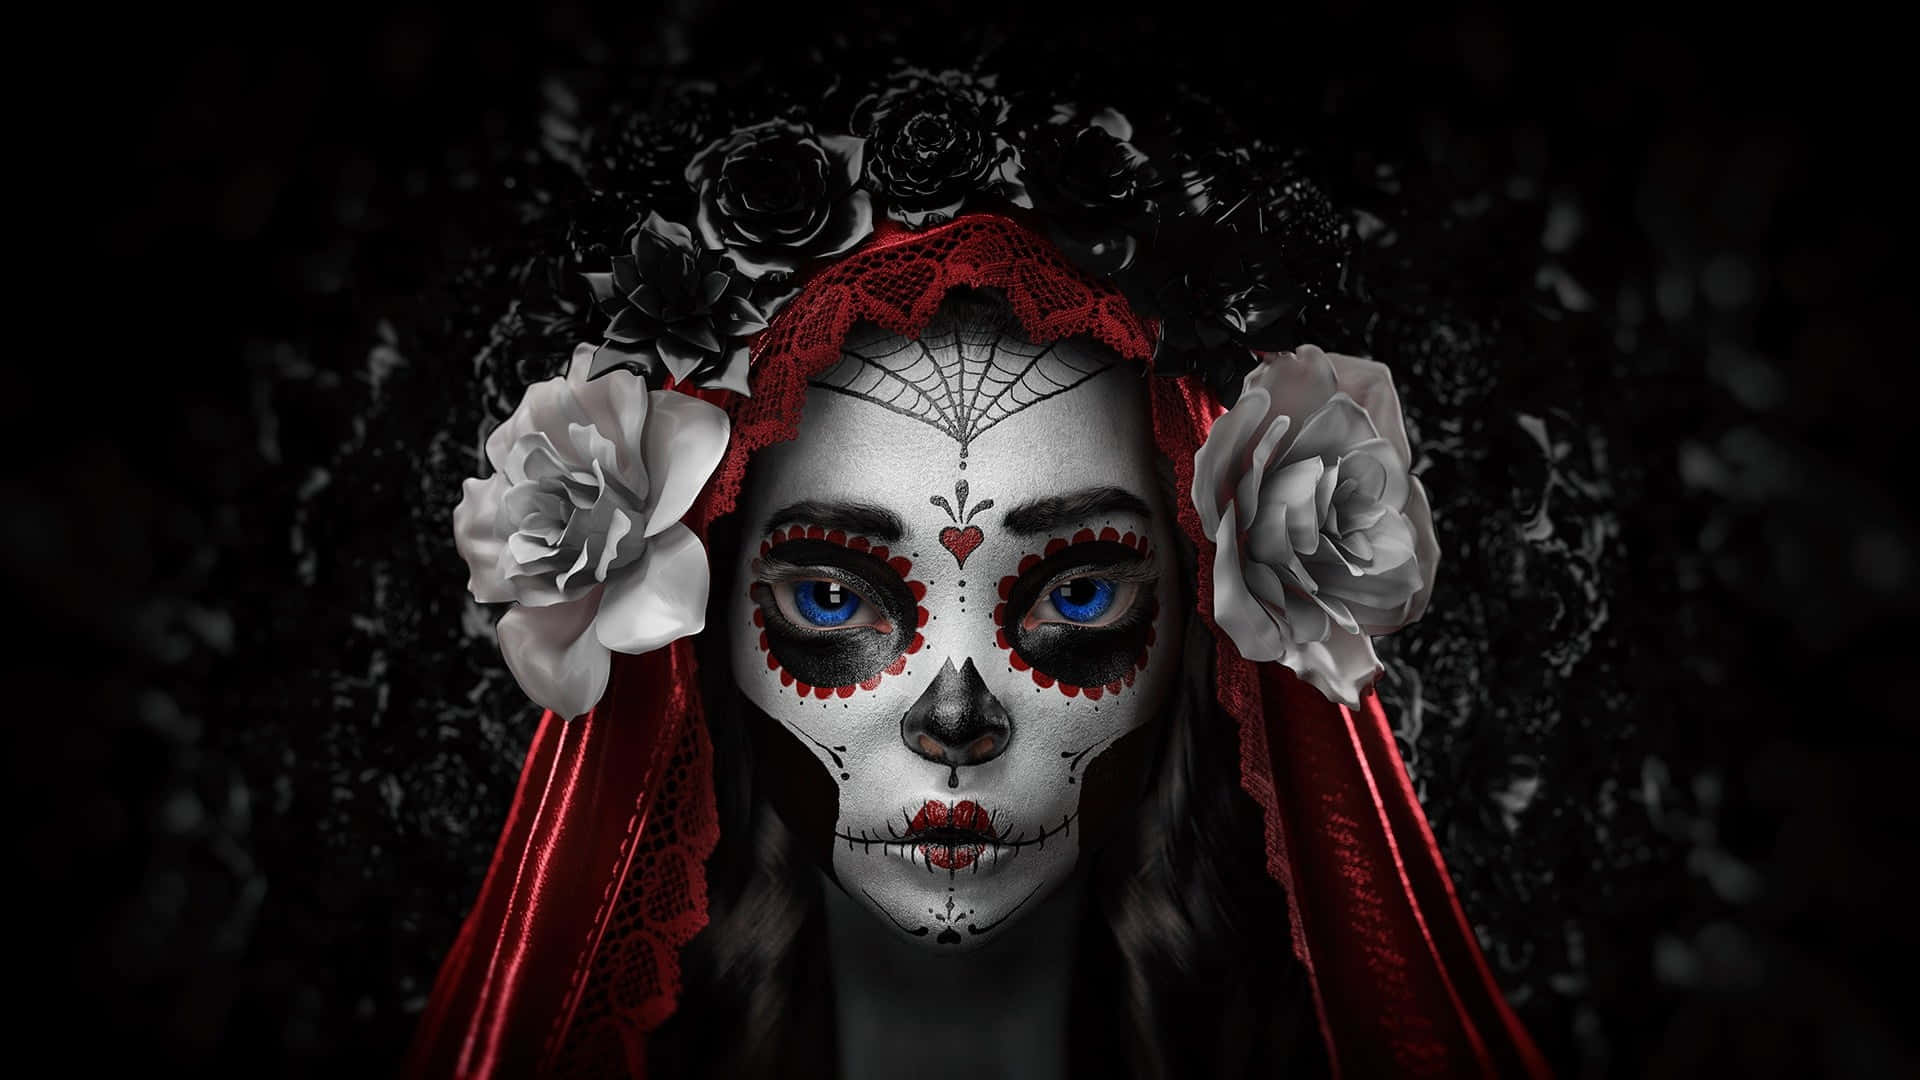 Let your creativity fly with Halloween makeup! Wallpaper